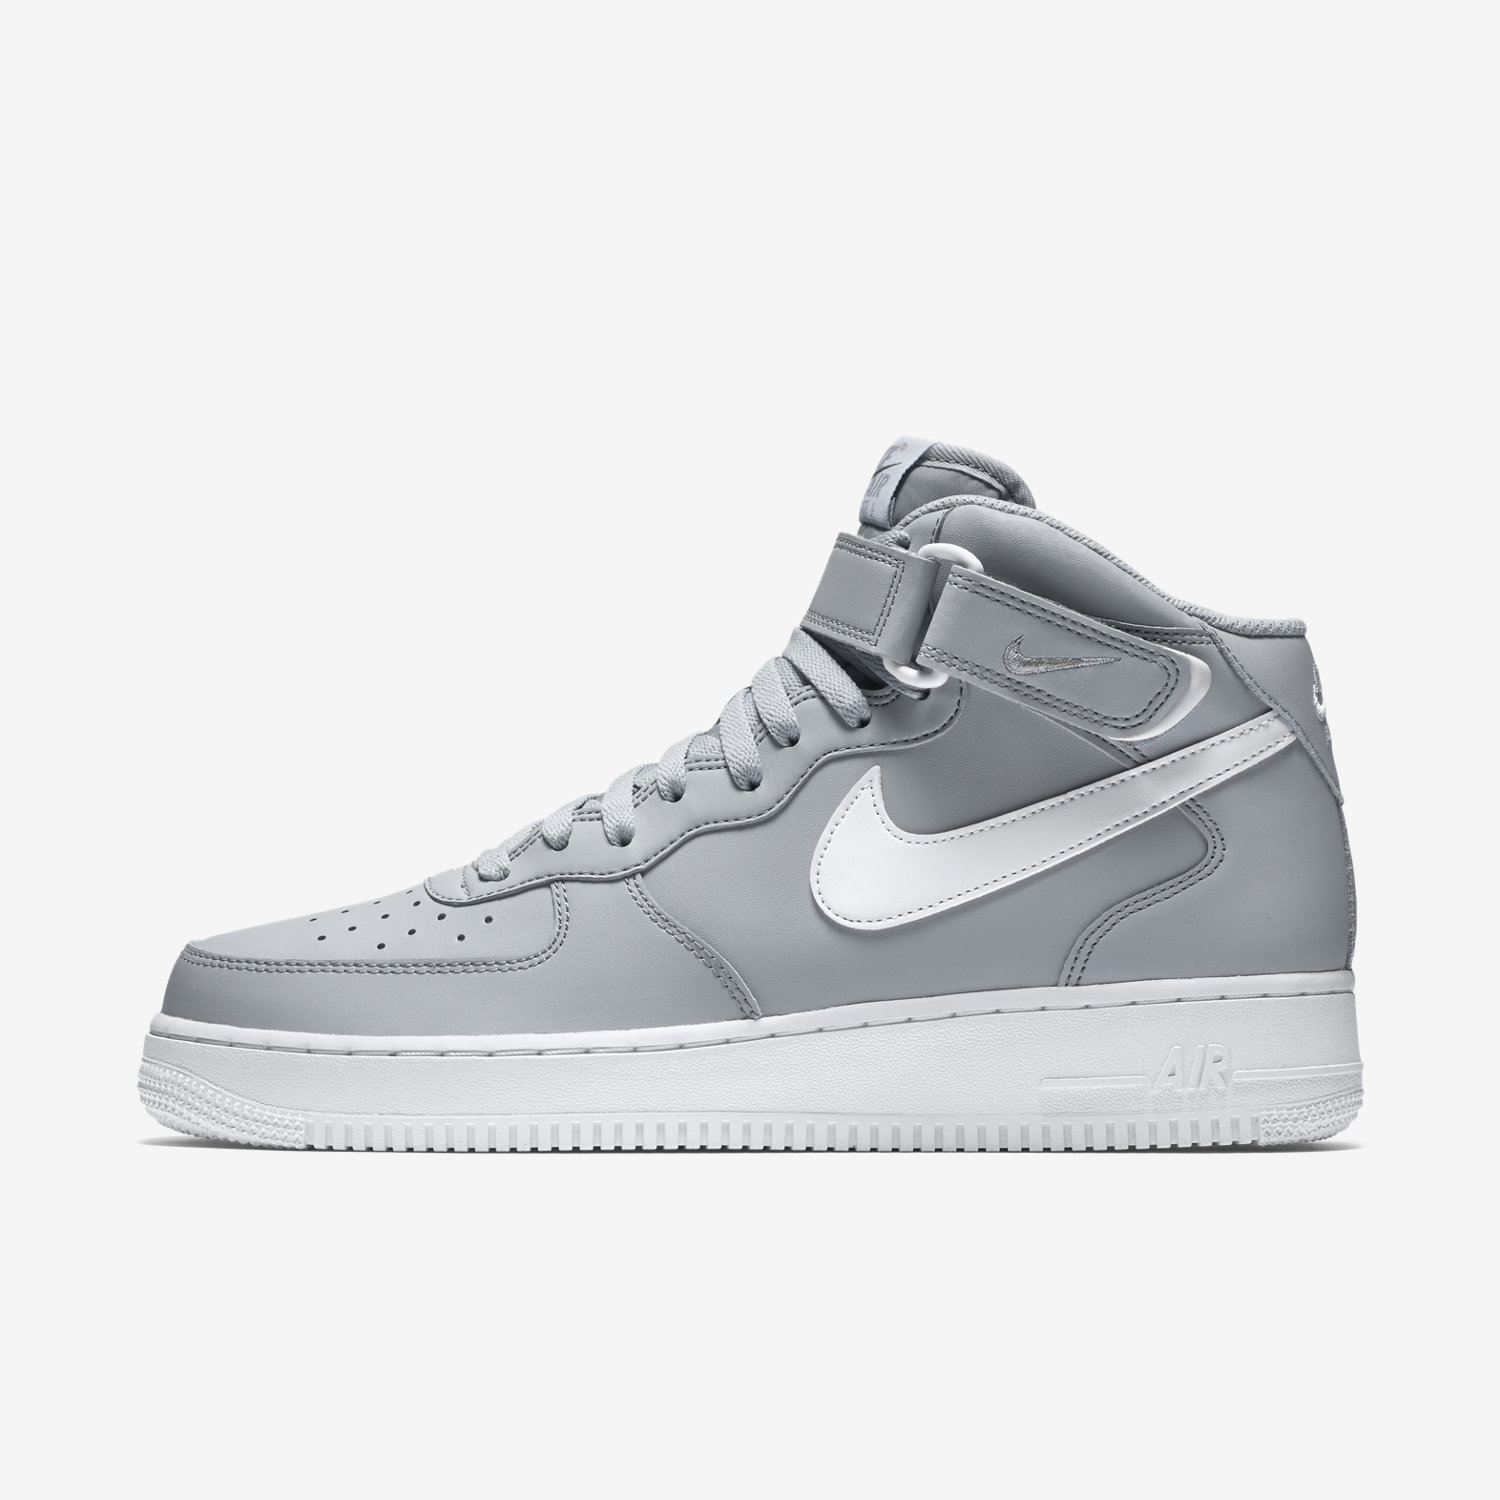 Buy Online nike air force 2 mid Cheap 